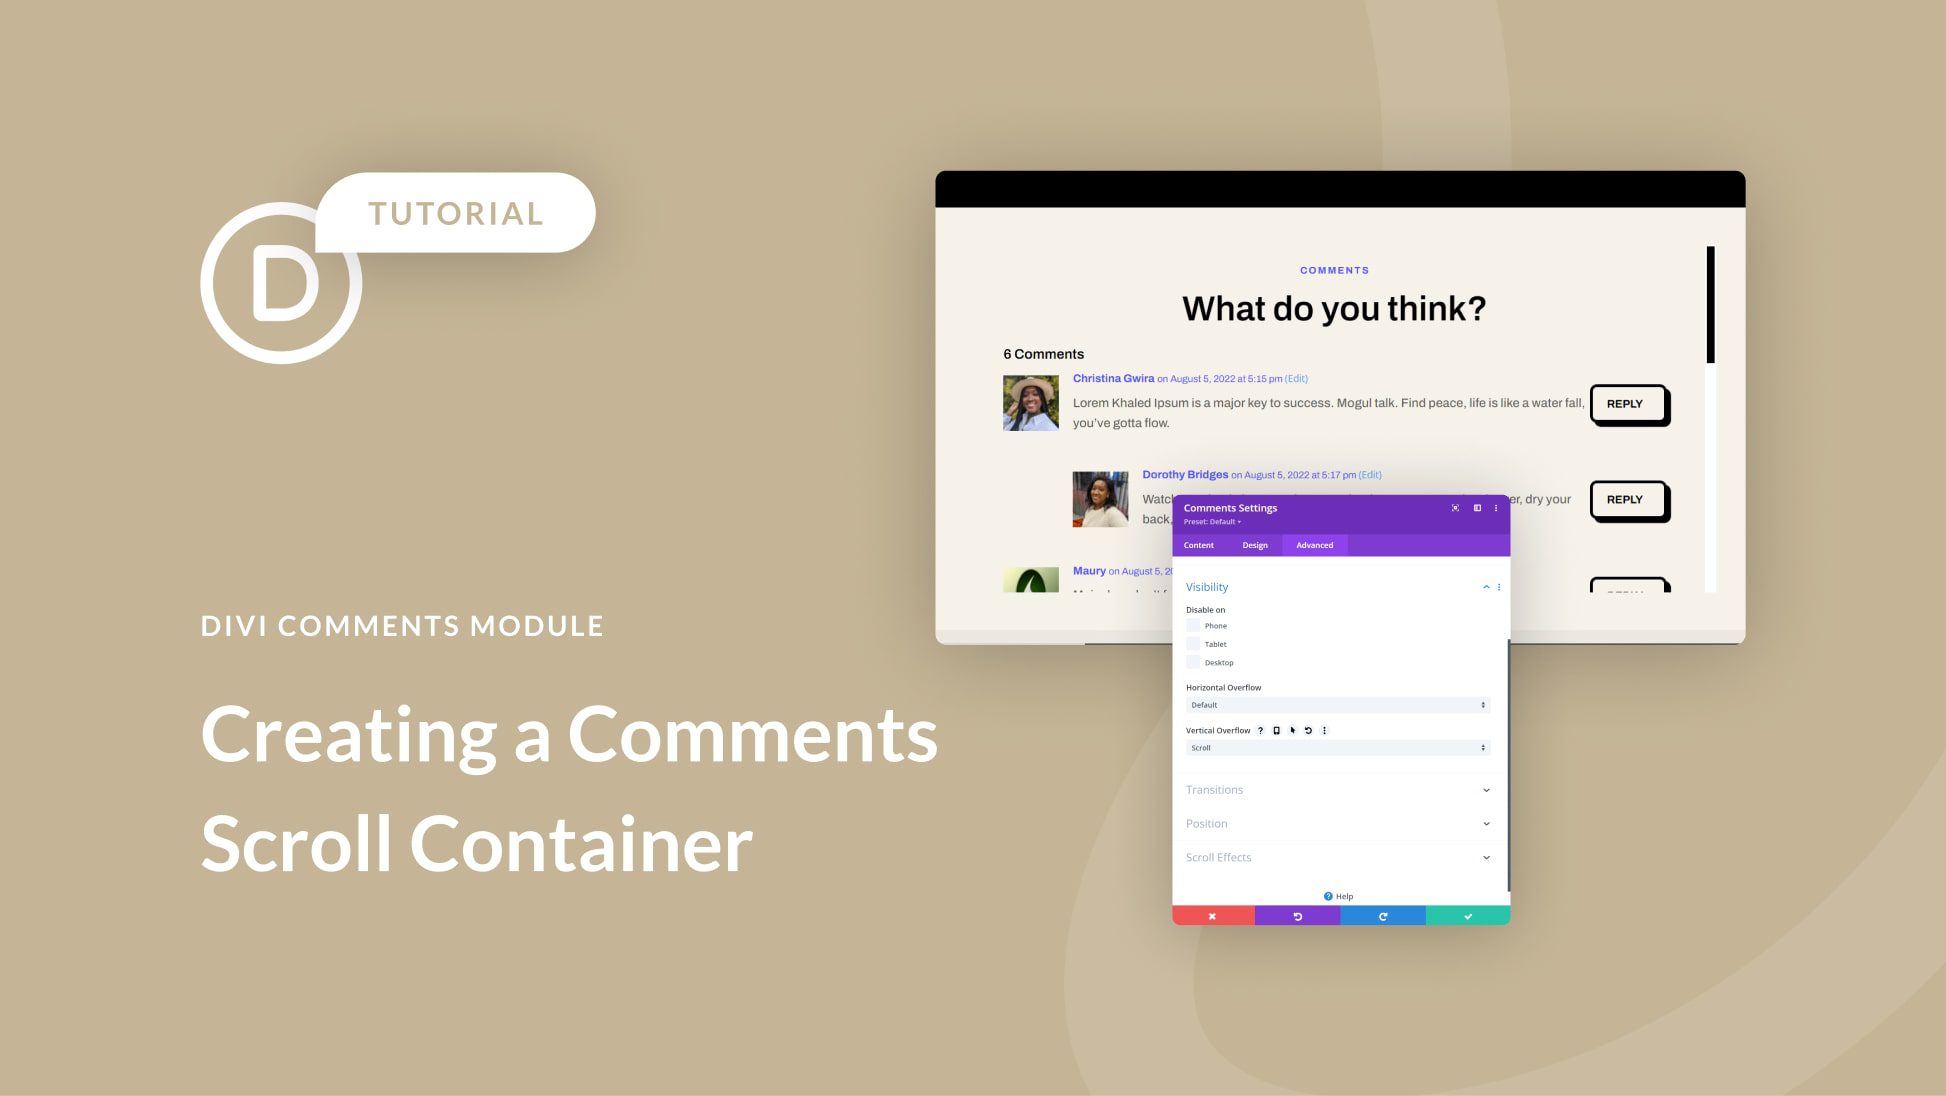 How to Create a Scroll Container for Your Divi Comments Module